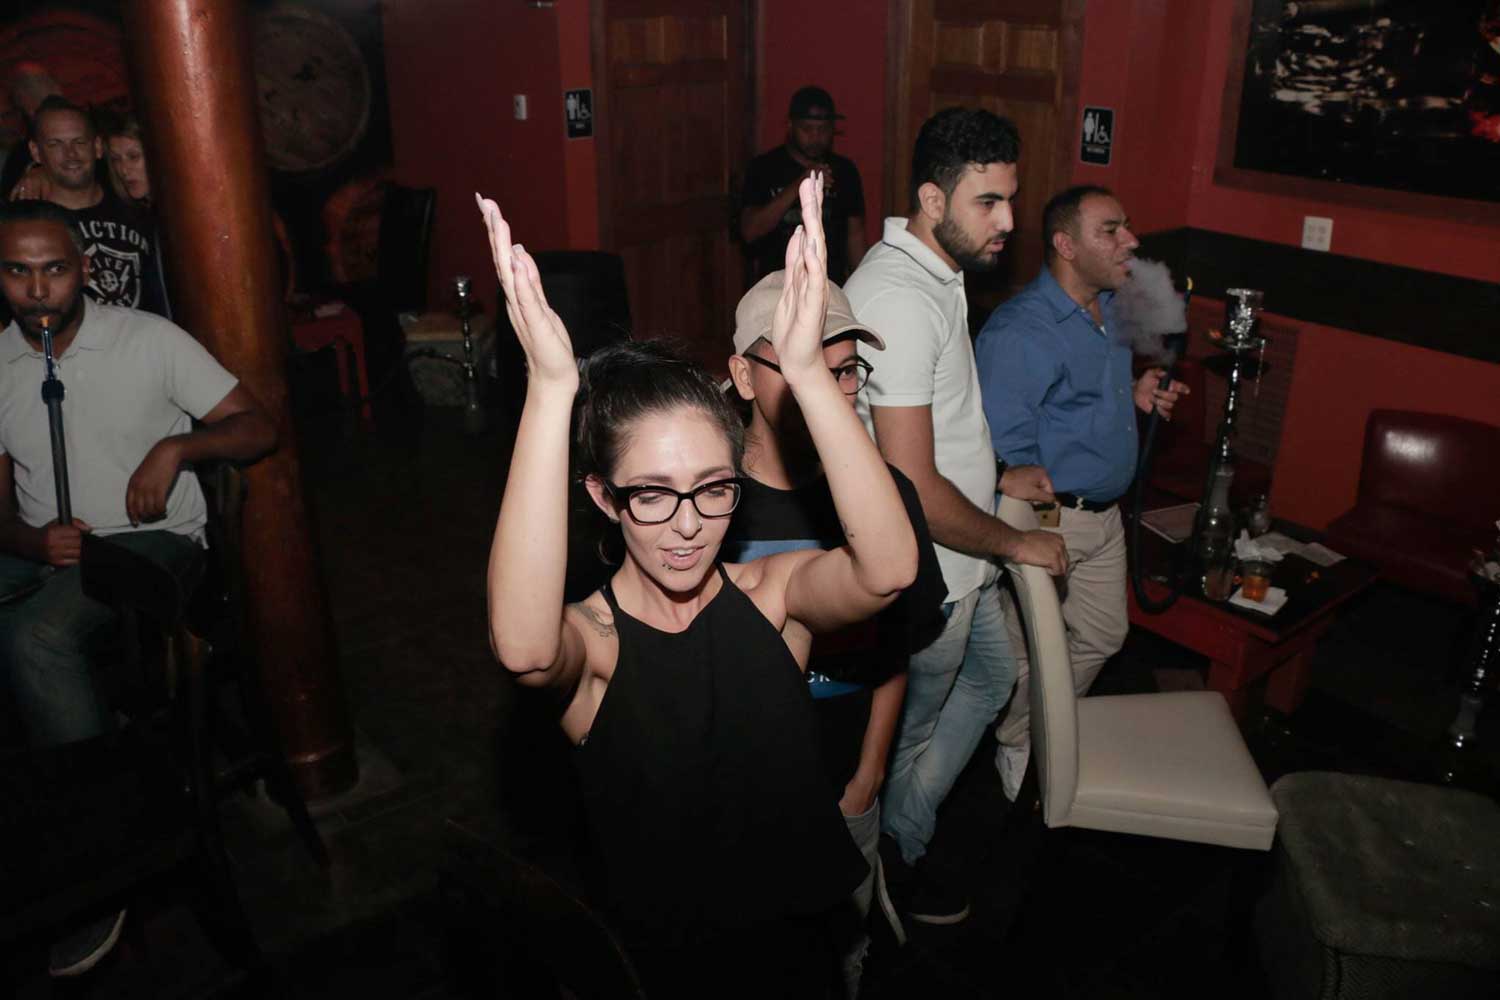 Woman Dancing Alone at Whiskey lounge — Night Out in Worcester, MA